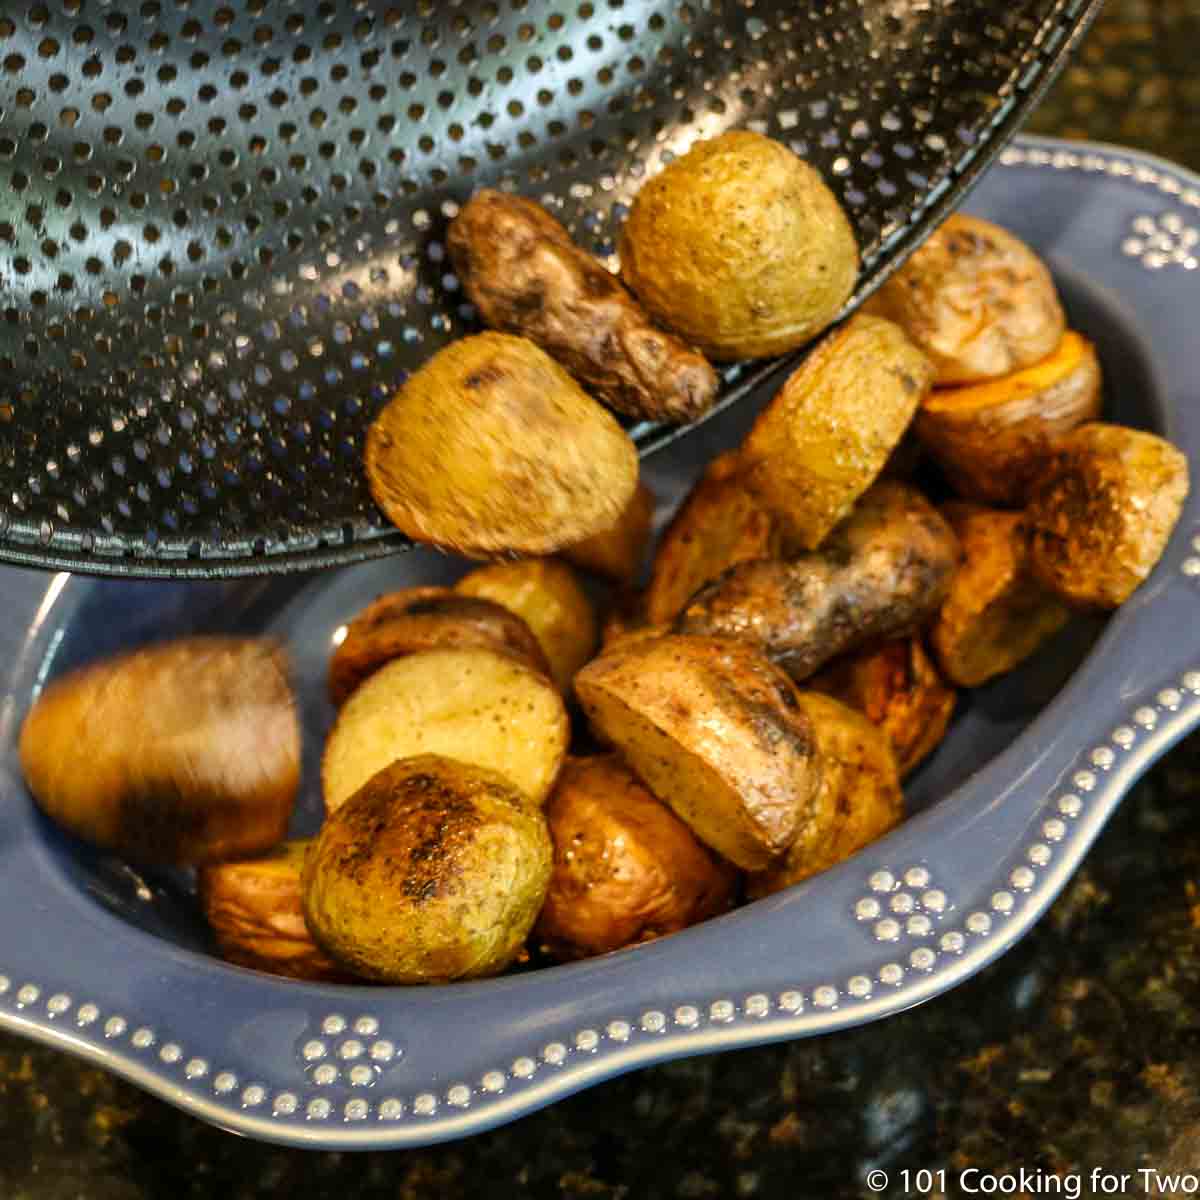 https://www.101cookingfortwo.com/wp-content/uploads/2017/05/Grilled-Baby-Potatoes.jpg